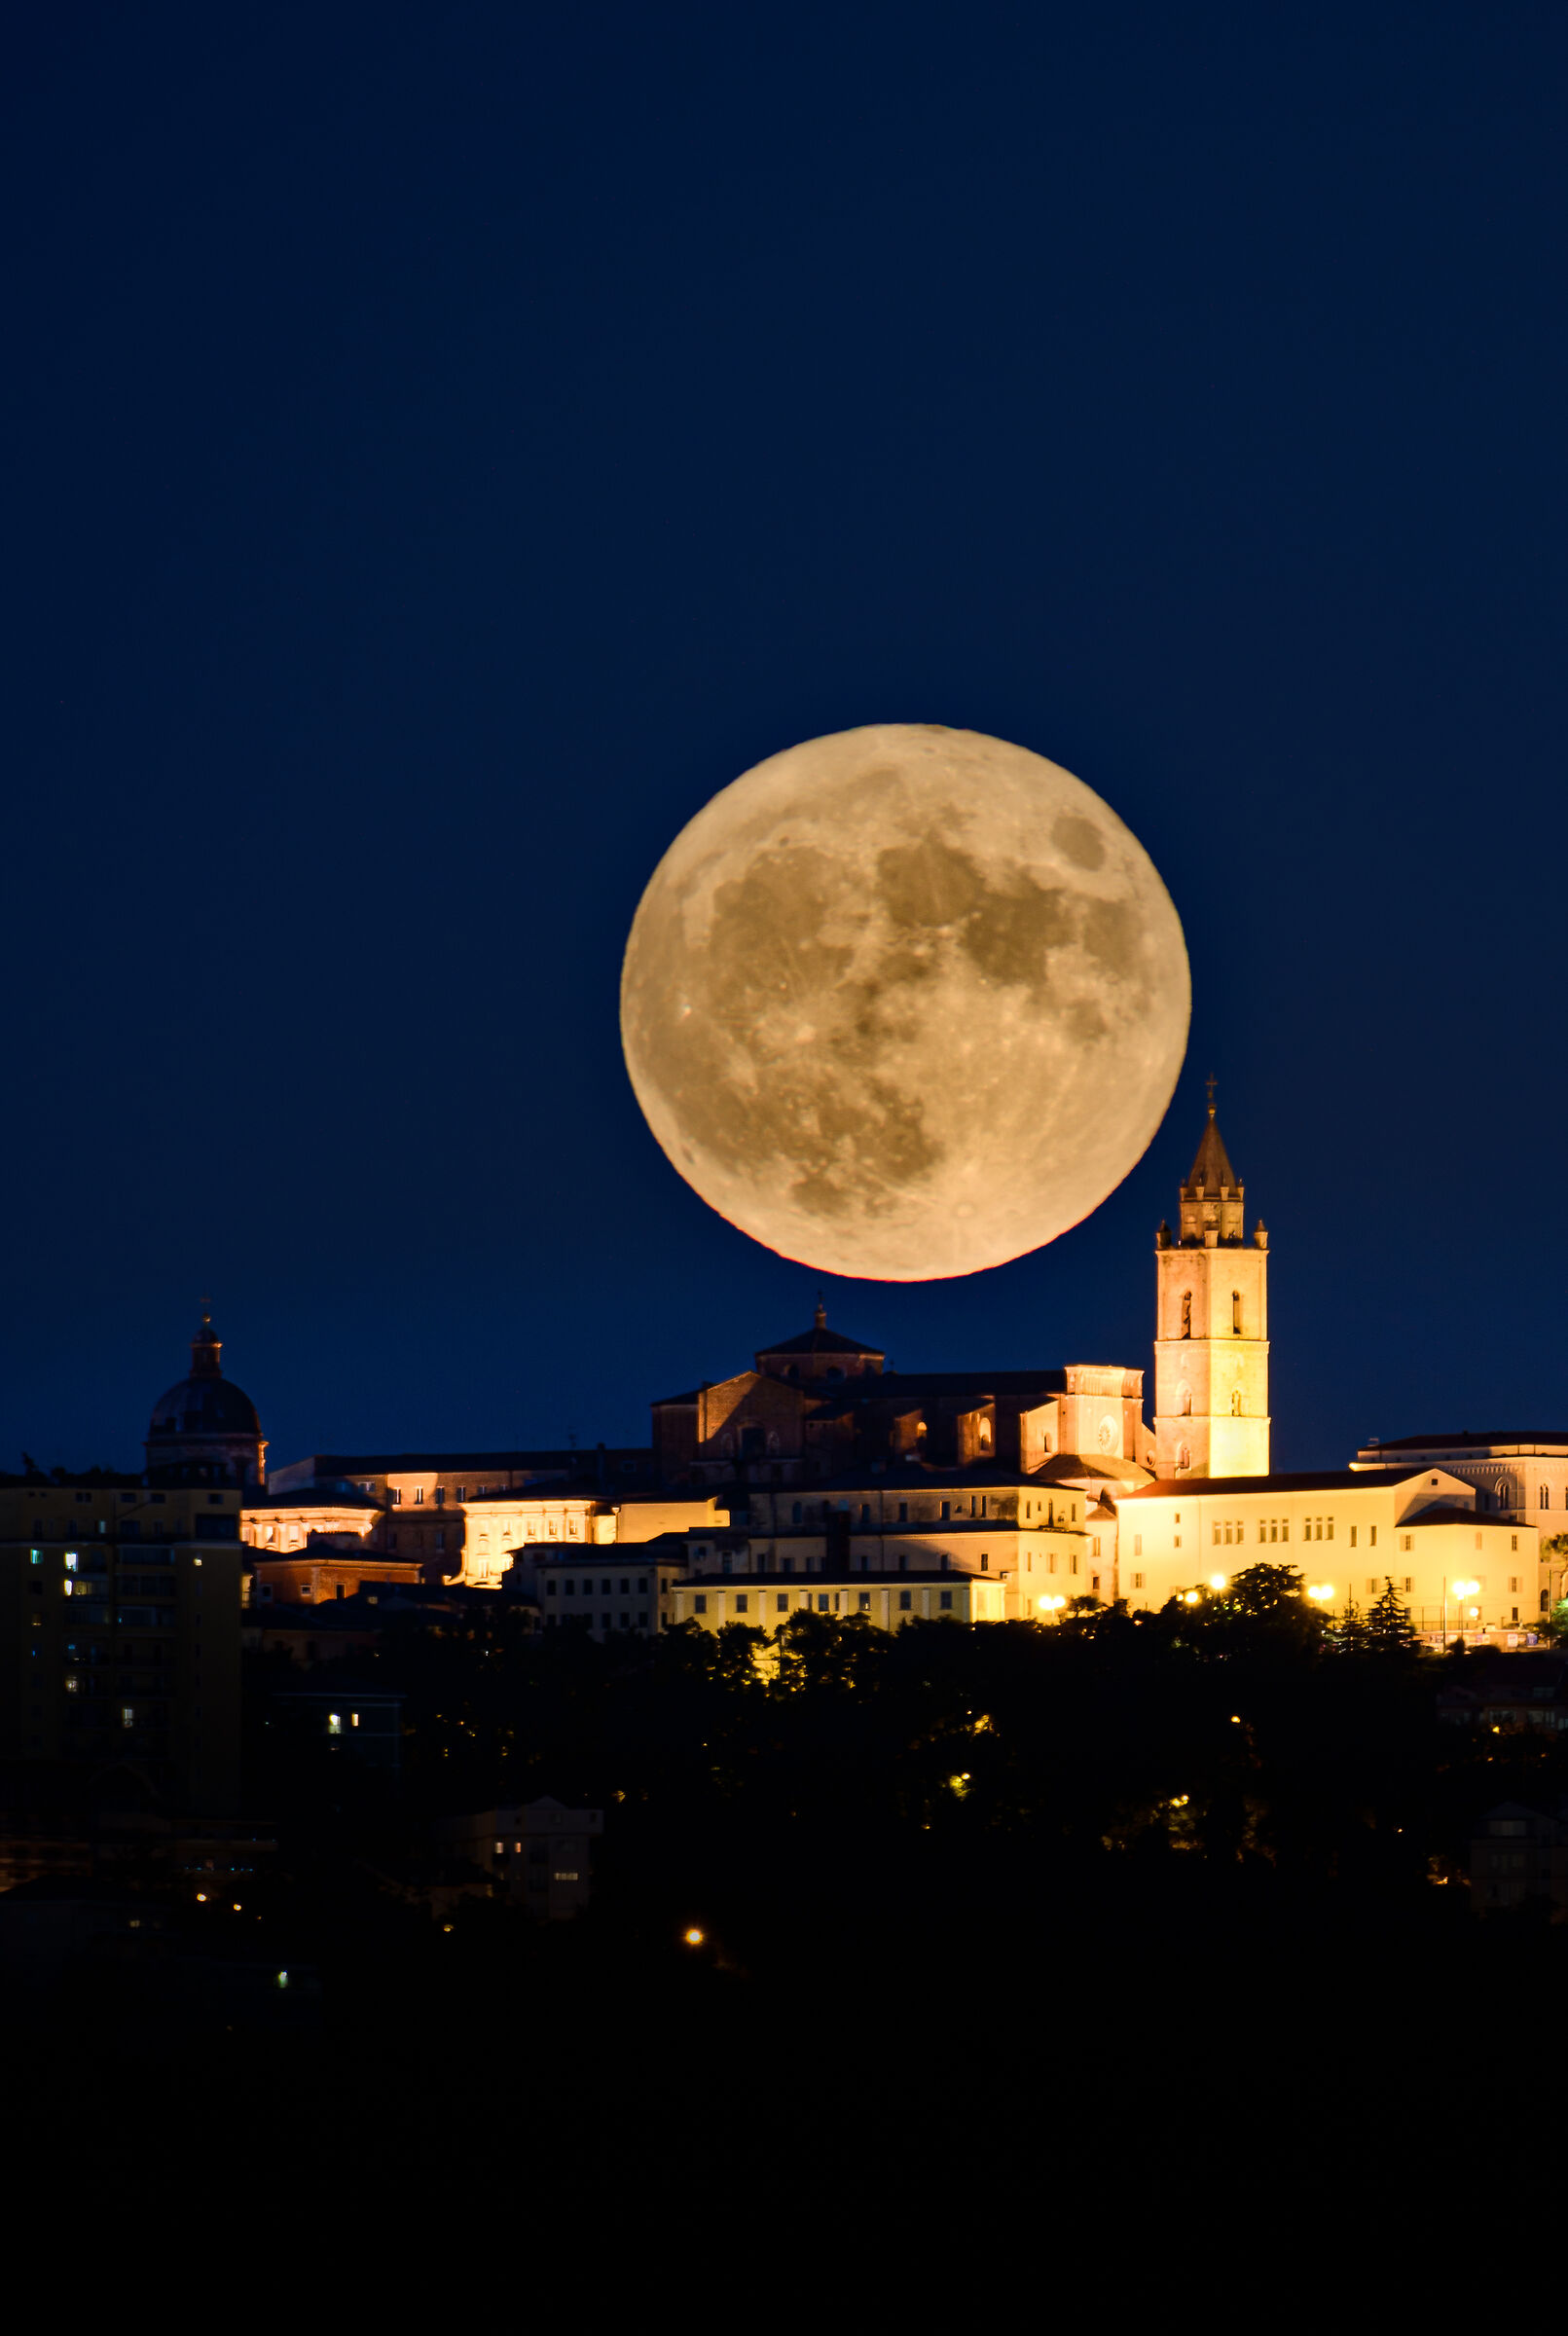 Chieti at the dawn of a new Moon...